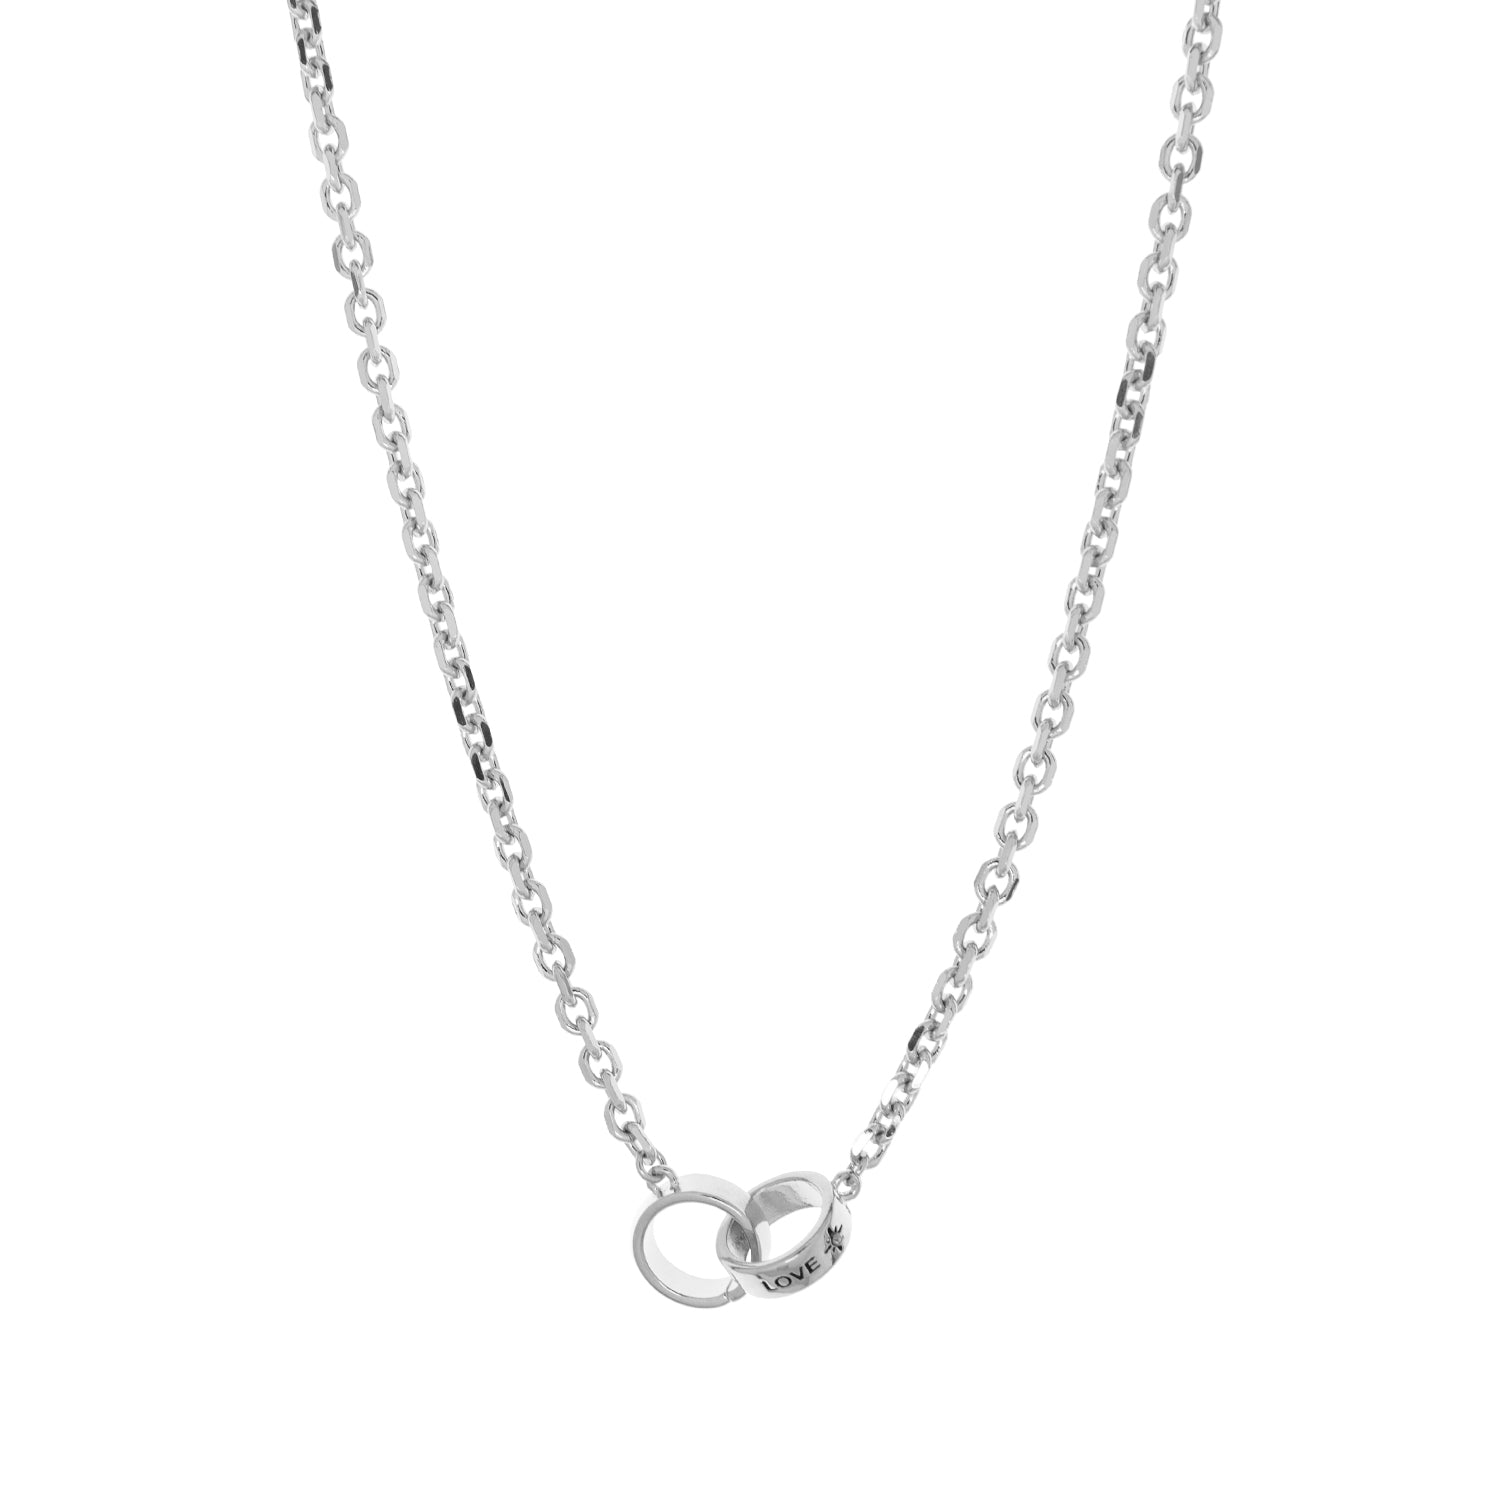 chain necklace with interlocked engraved LOVE circles